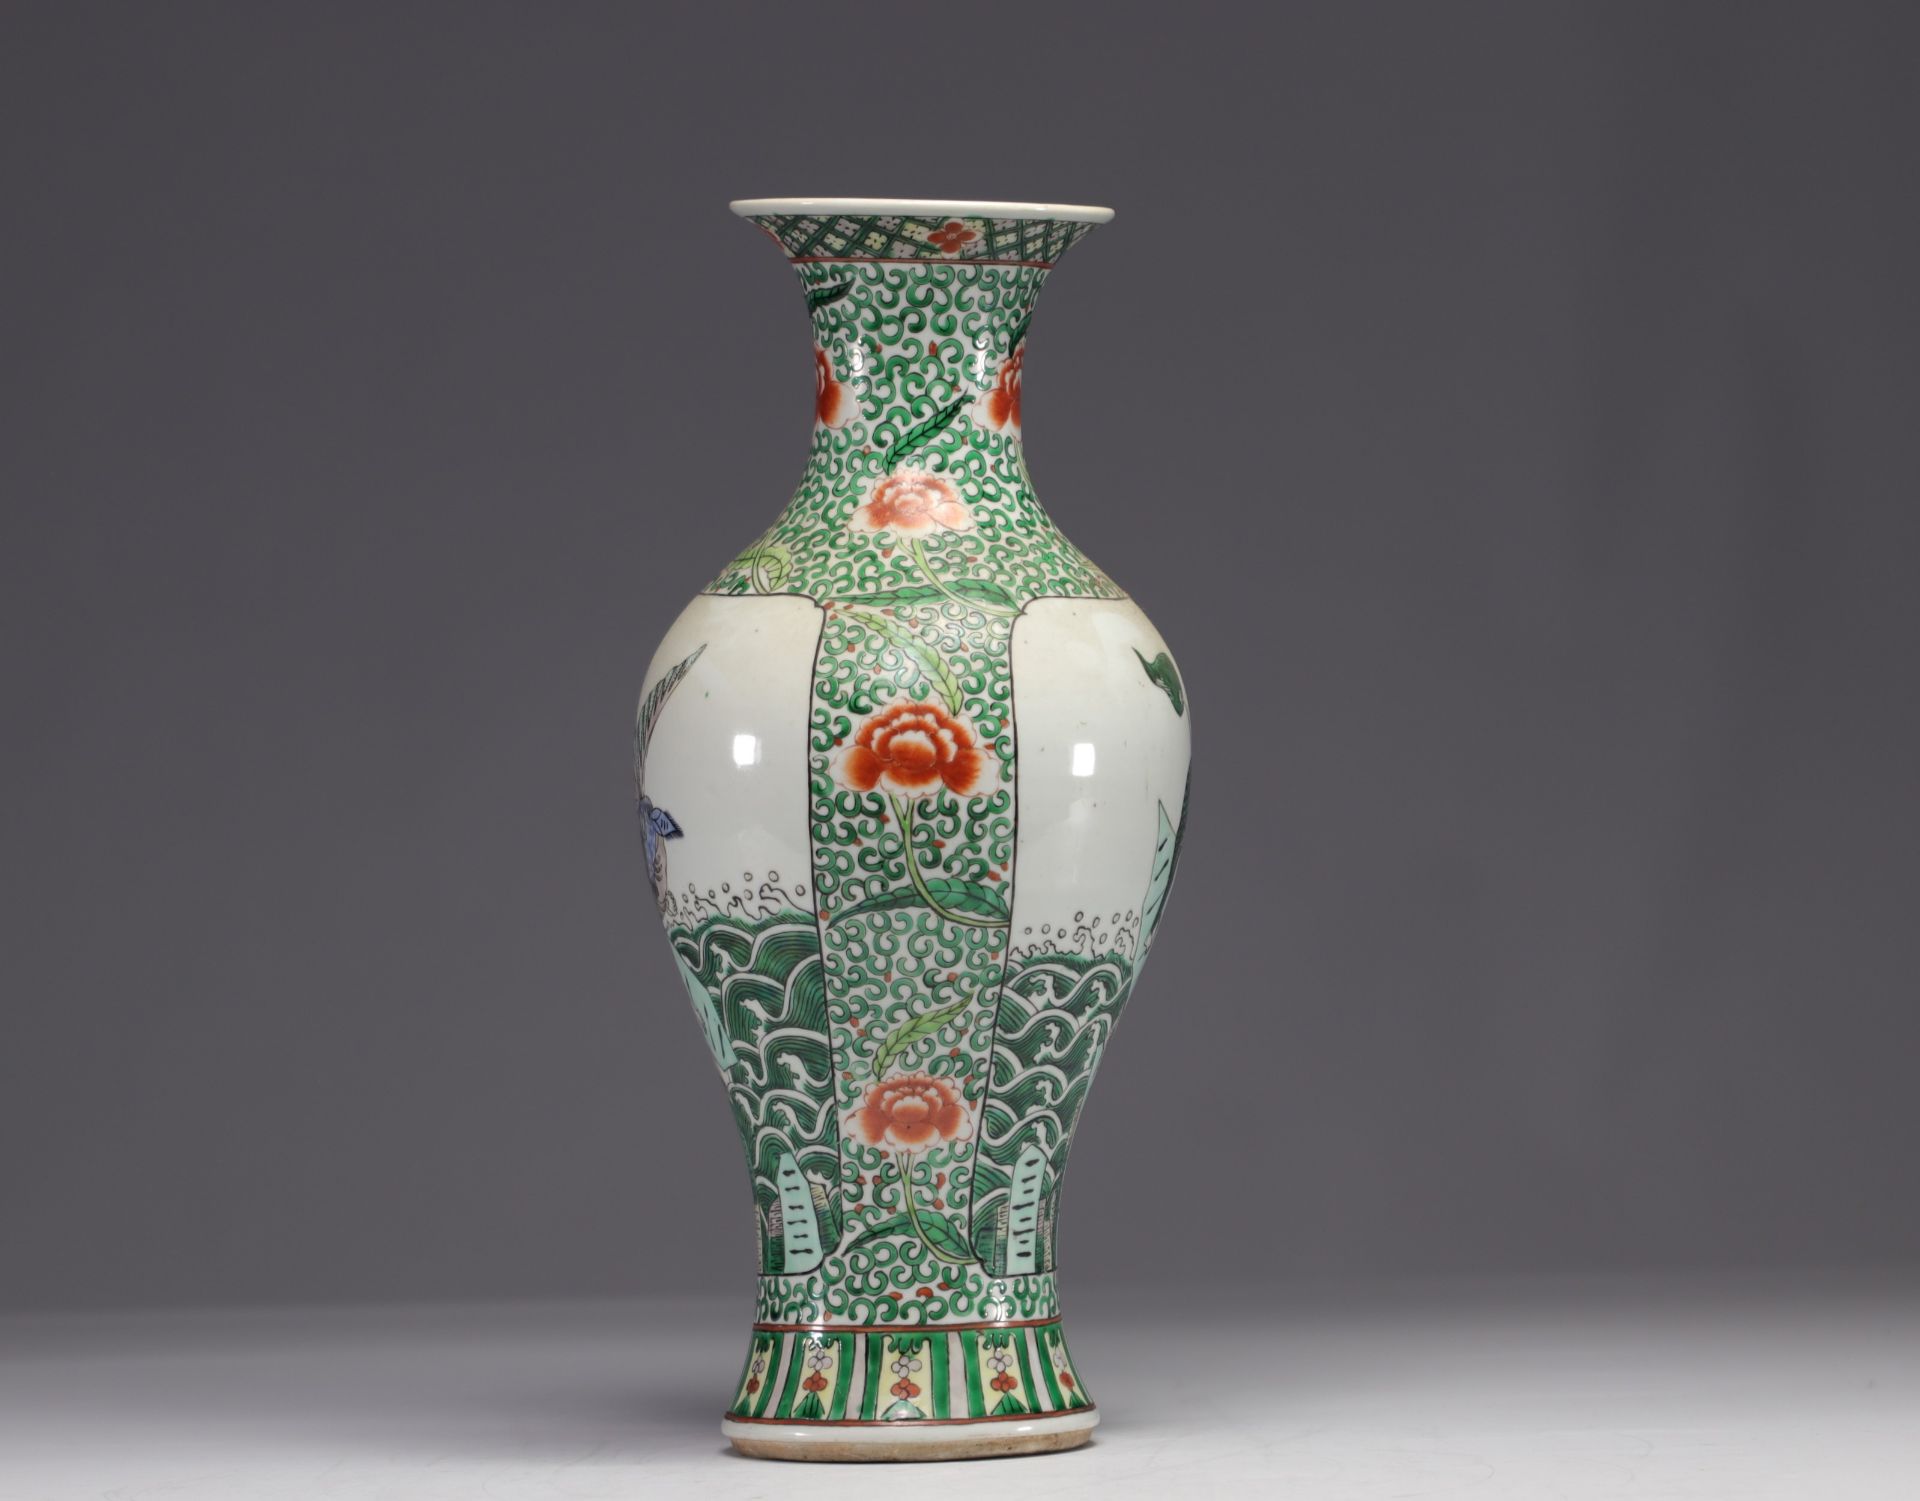 China - A green family porcelain baluster vase, decorated with birds in a cartouche, 19th century. - Image 2 of 6